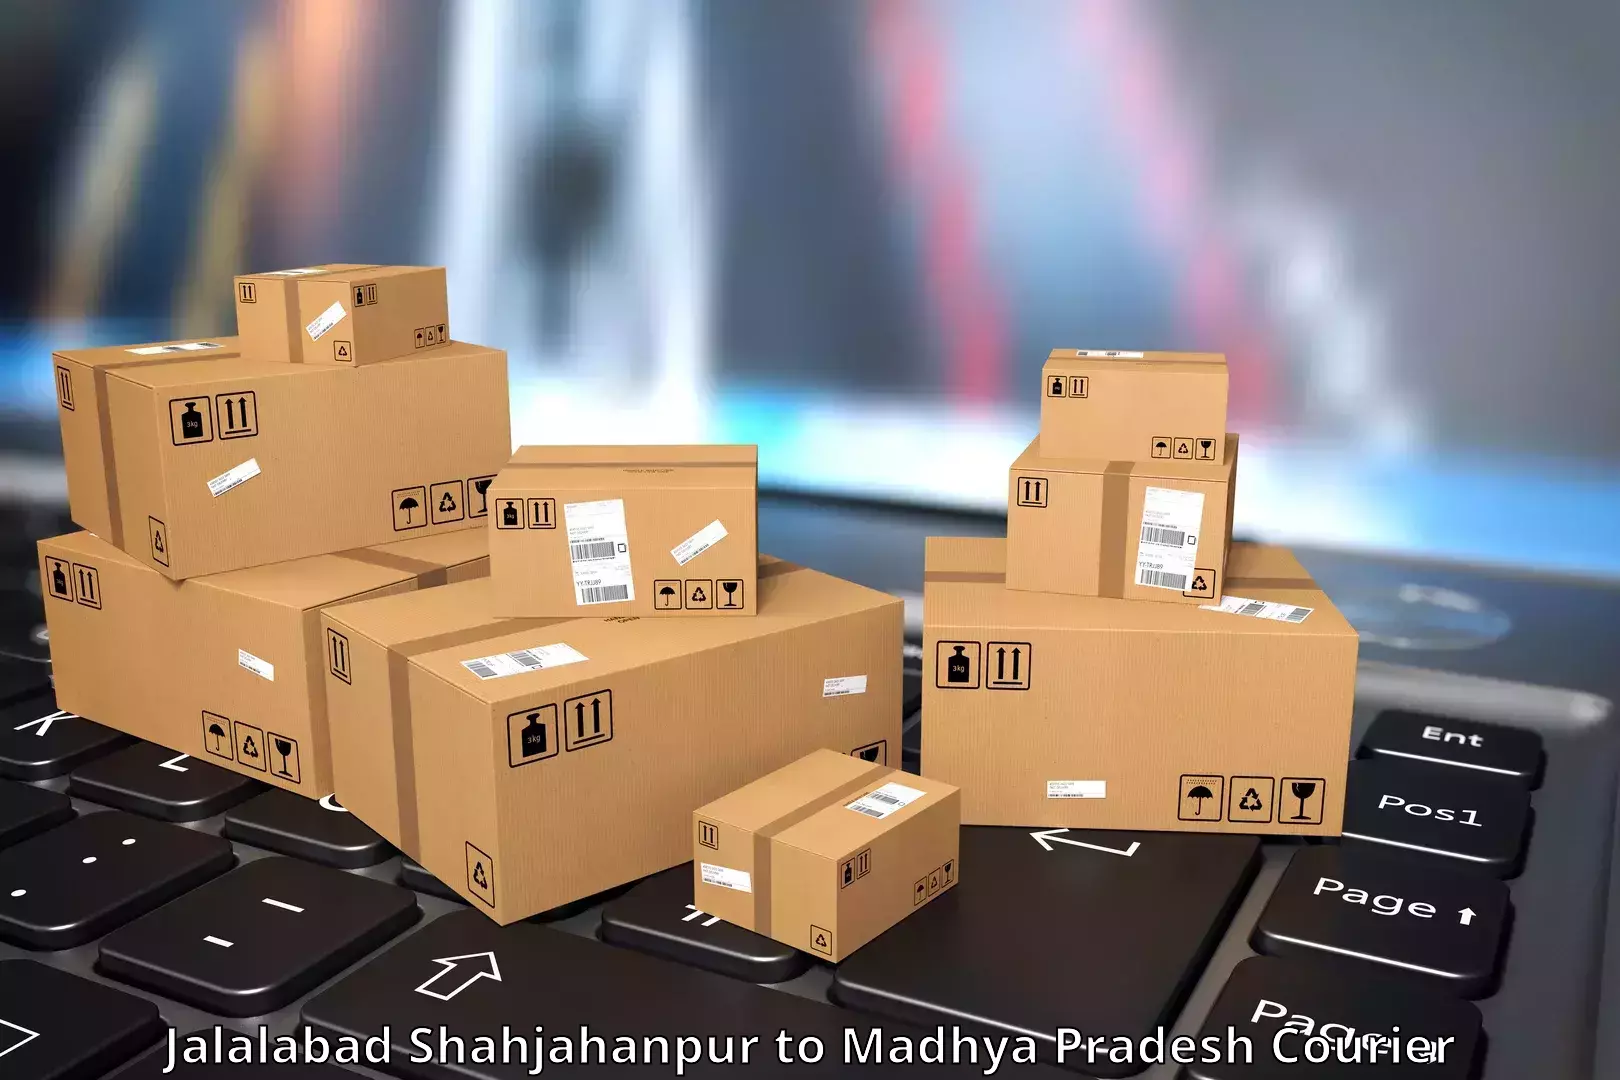 User-friendly courier app Jalalabad Shahjahanpur to Chandla